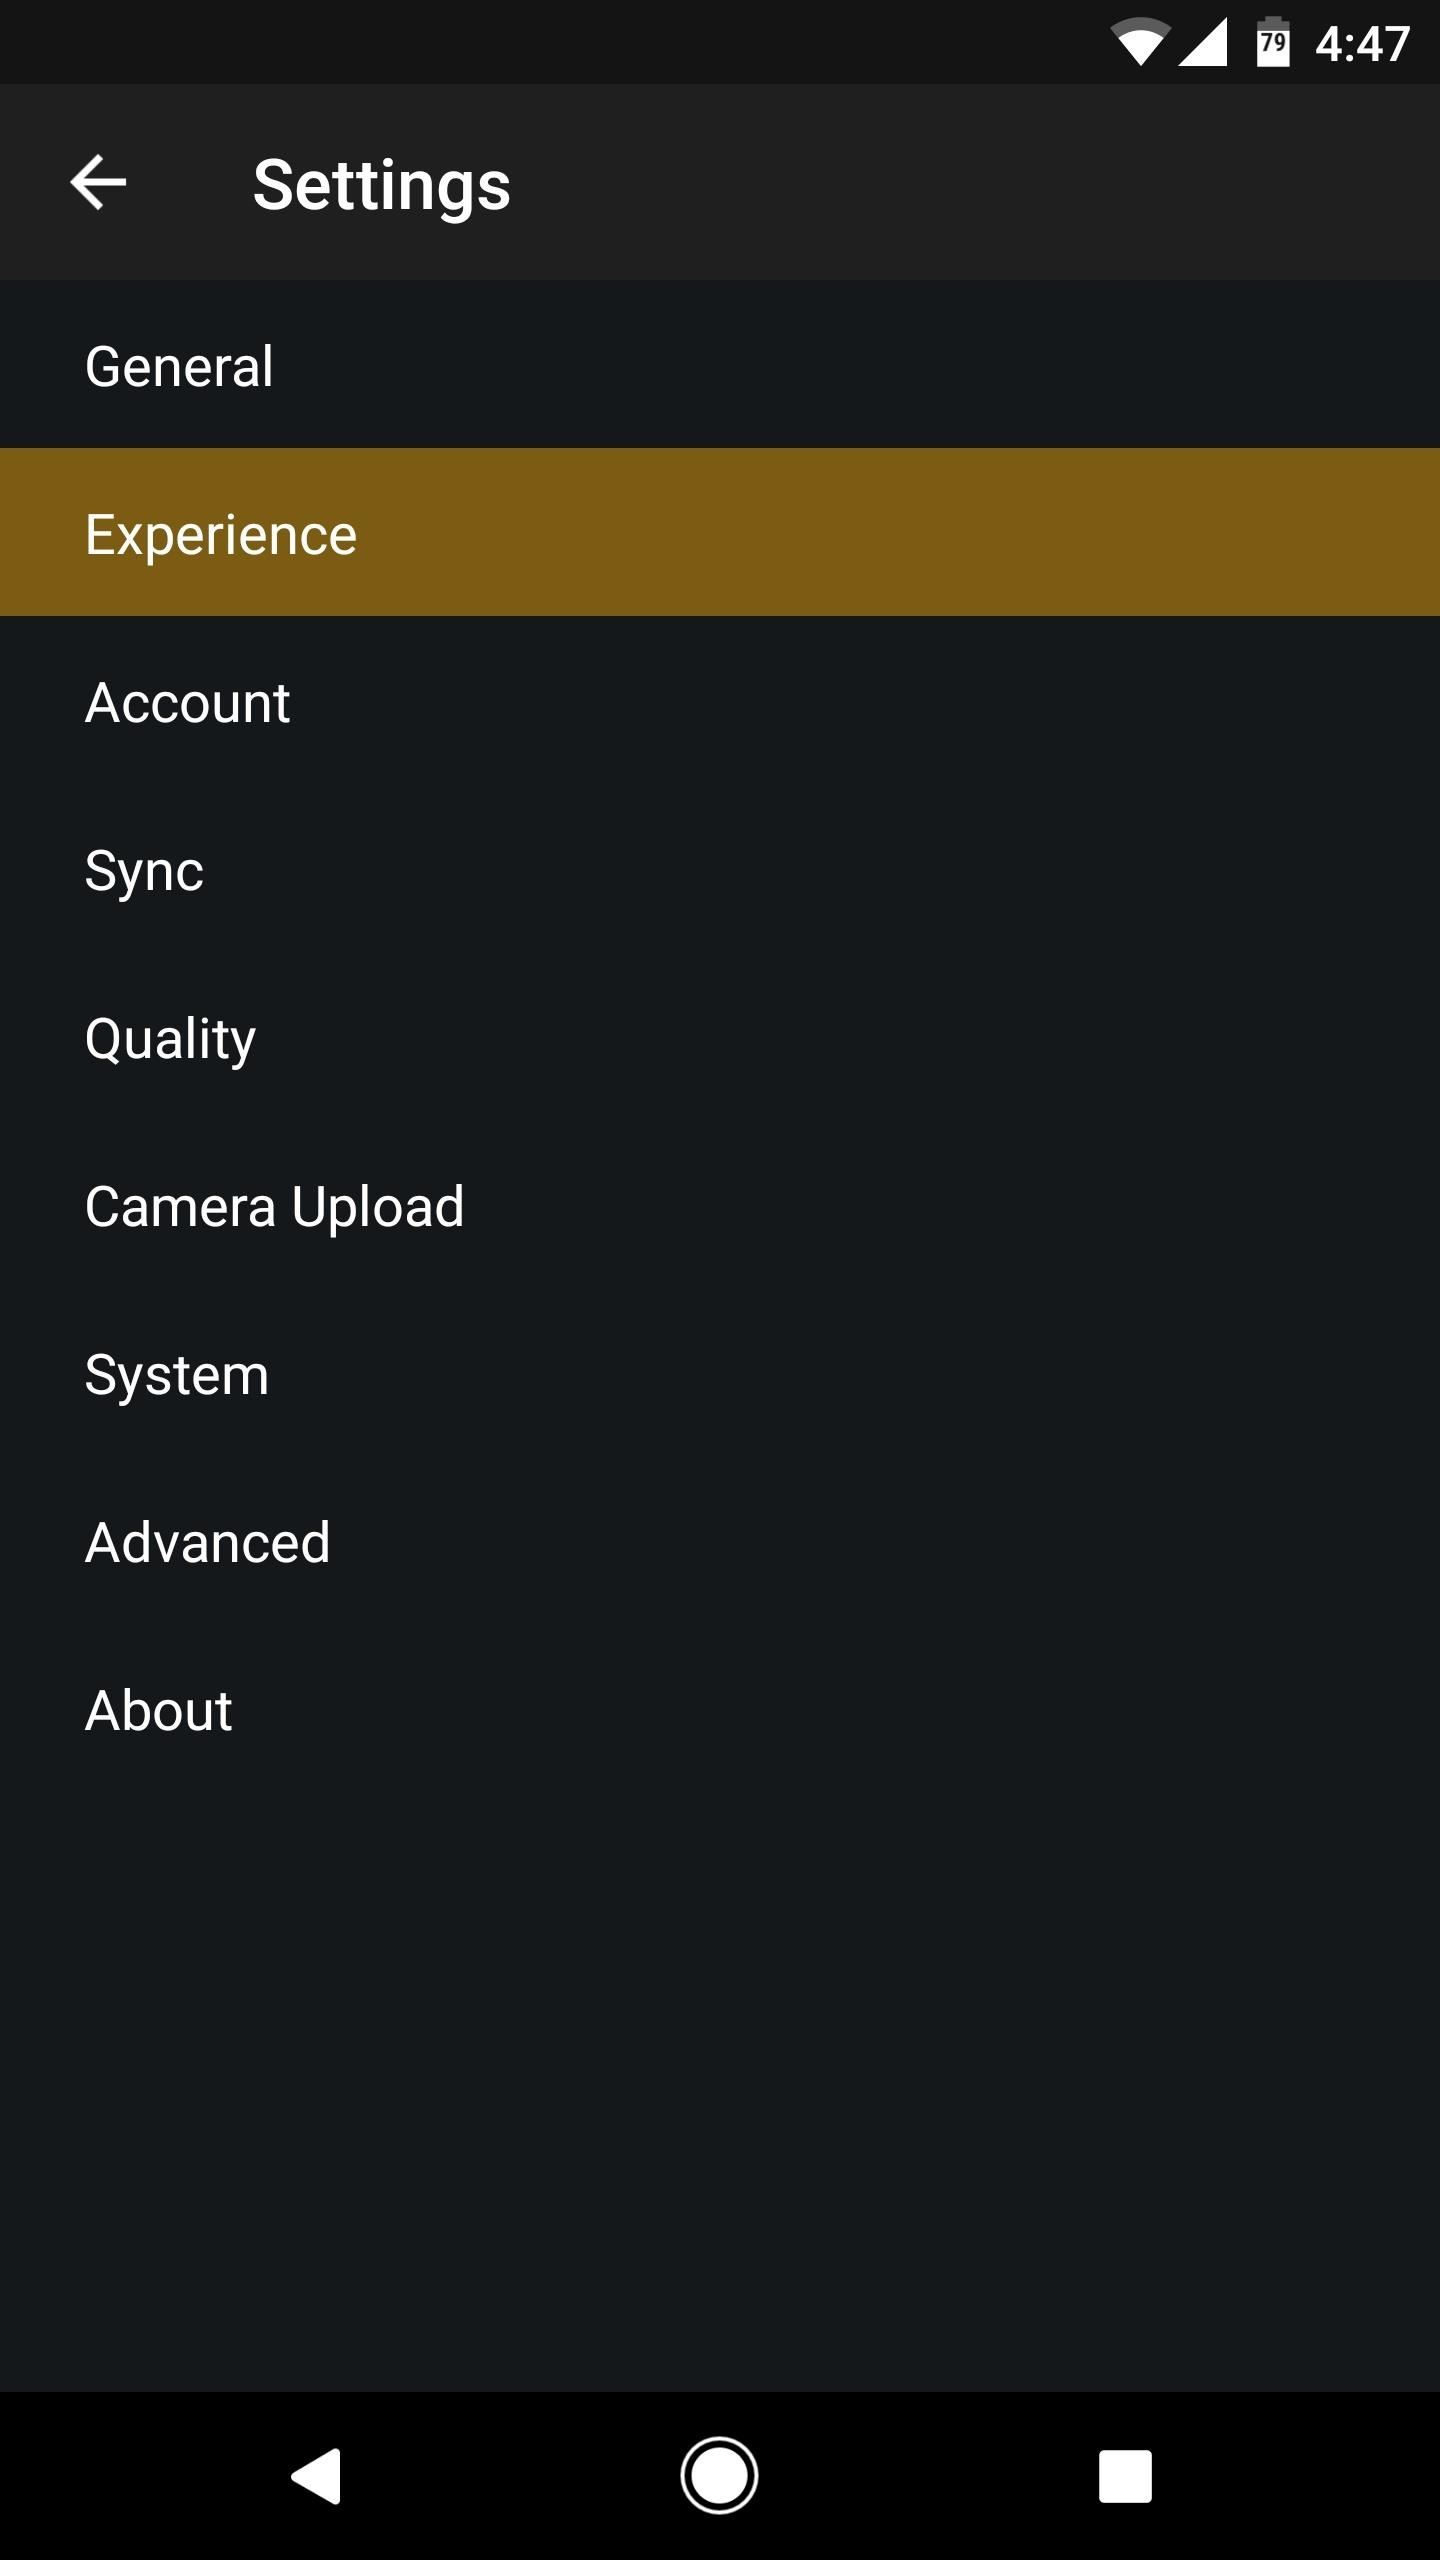 Plex 101: How to Disable Auto Play for TV Episodes